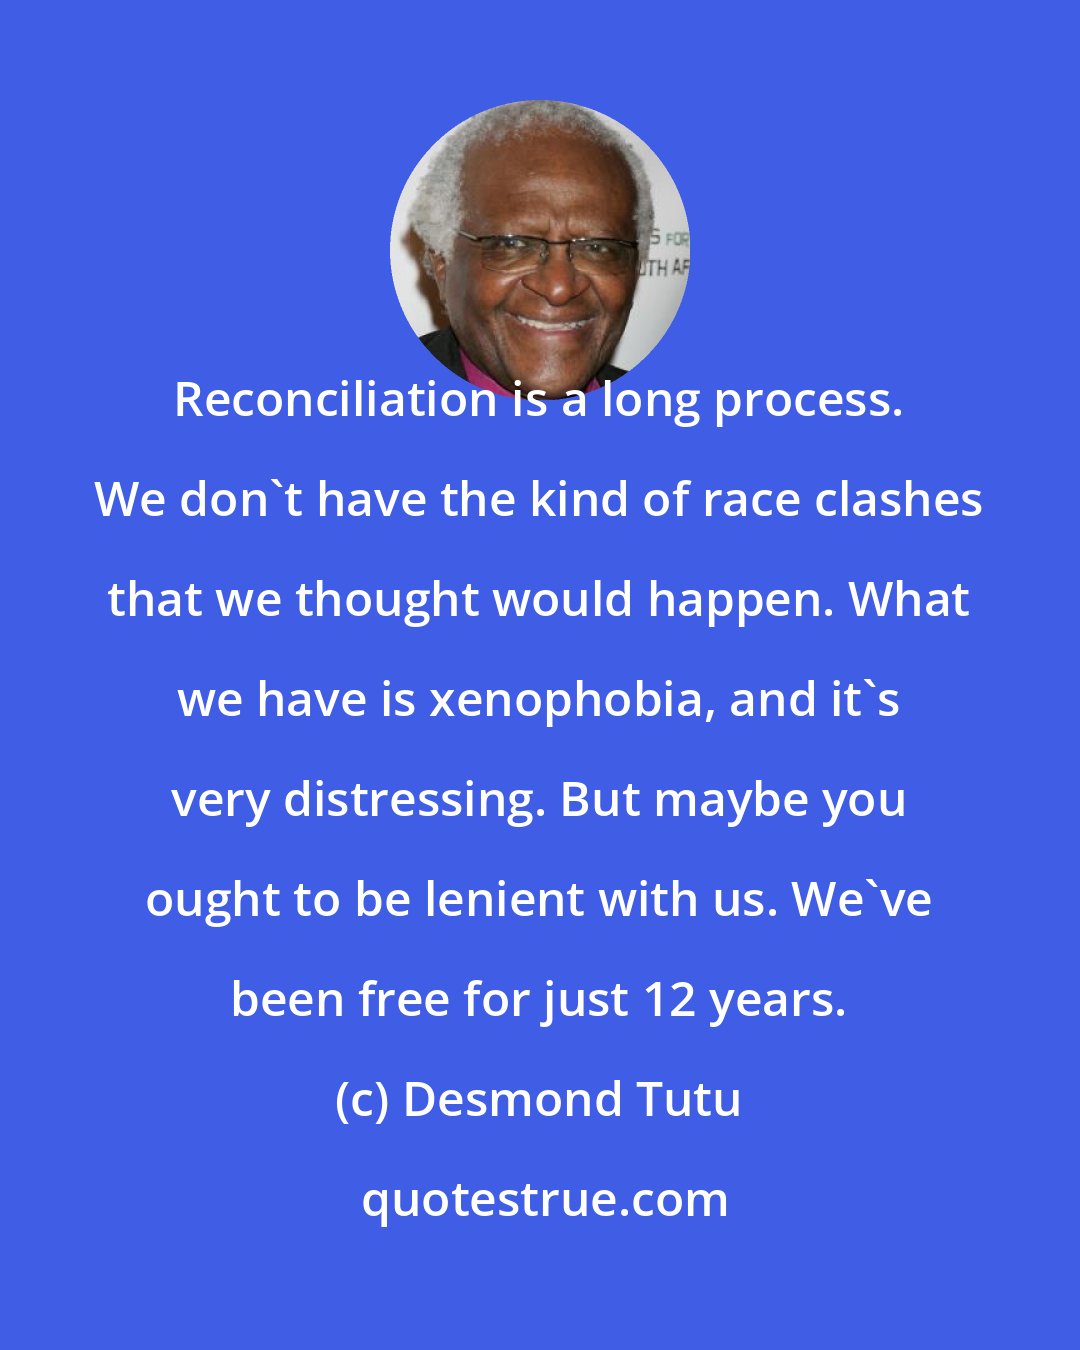 Desmond Tutu: Reconciliation is a long process. We don't have the kind of race clashes that we thought would happen. What we have is xenophobia, and it's very distressing. But maybe you ought to be lenient with us. We've been free for just 12 years.